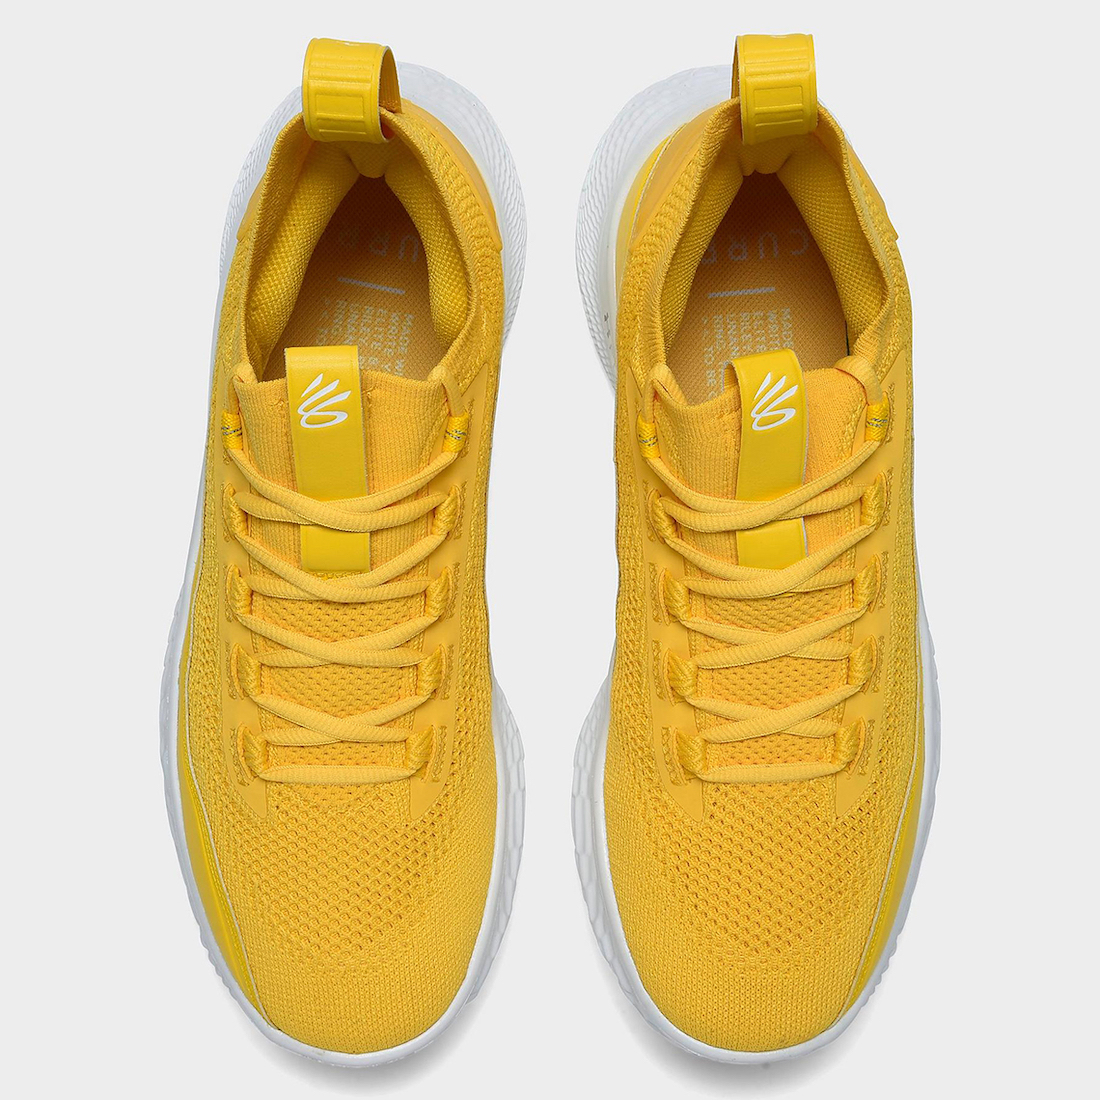 Curry Flow 8 Yellow 3023085-701 Release Date